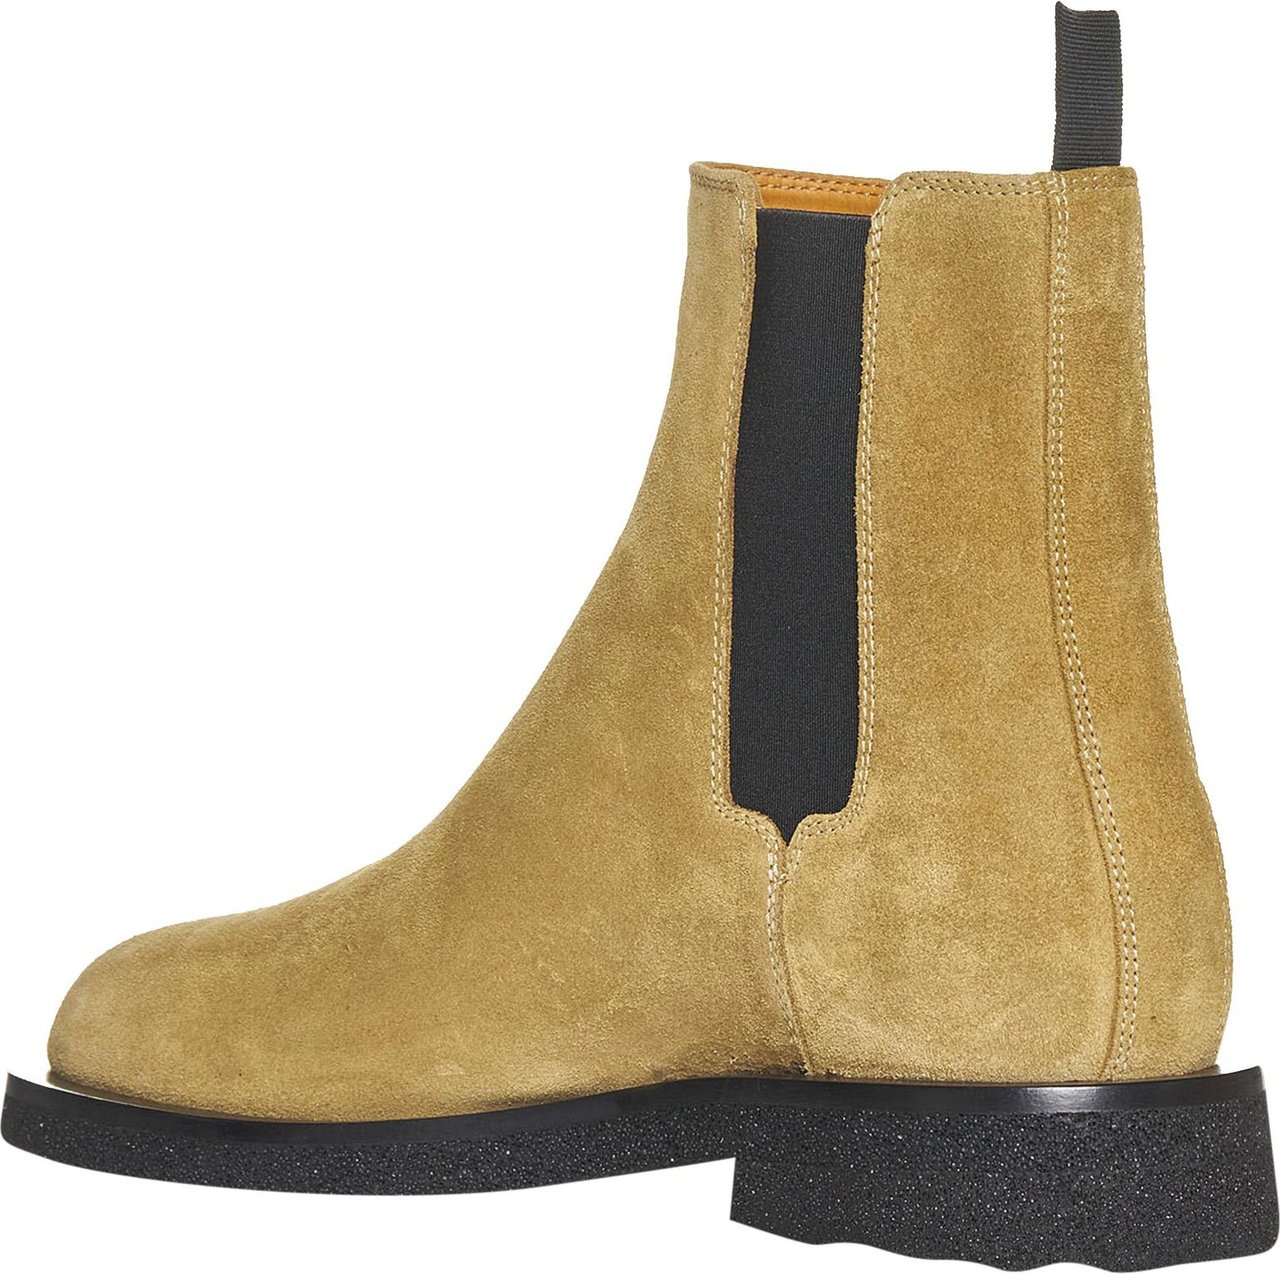 OFF-WHITE Off-White Suede Ankle Boots Beige